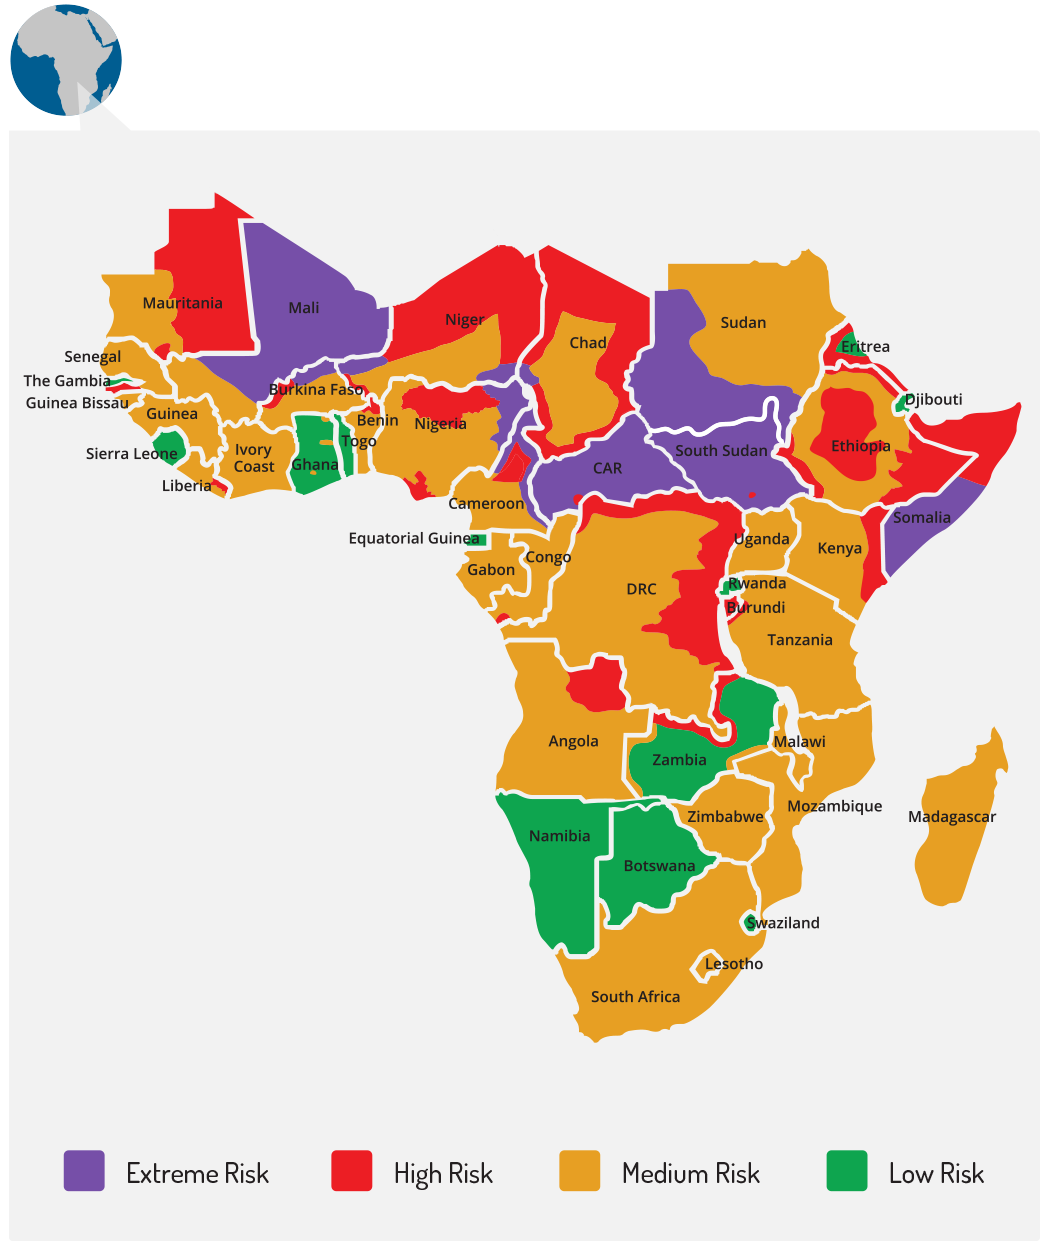 c:\users\marinap\desktop\marina\'s work\max\monthly map risk levels\africa_zoom in.png